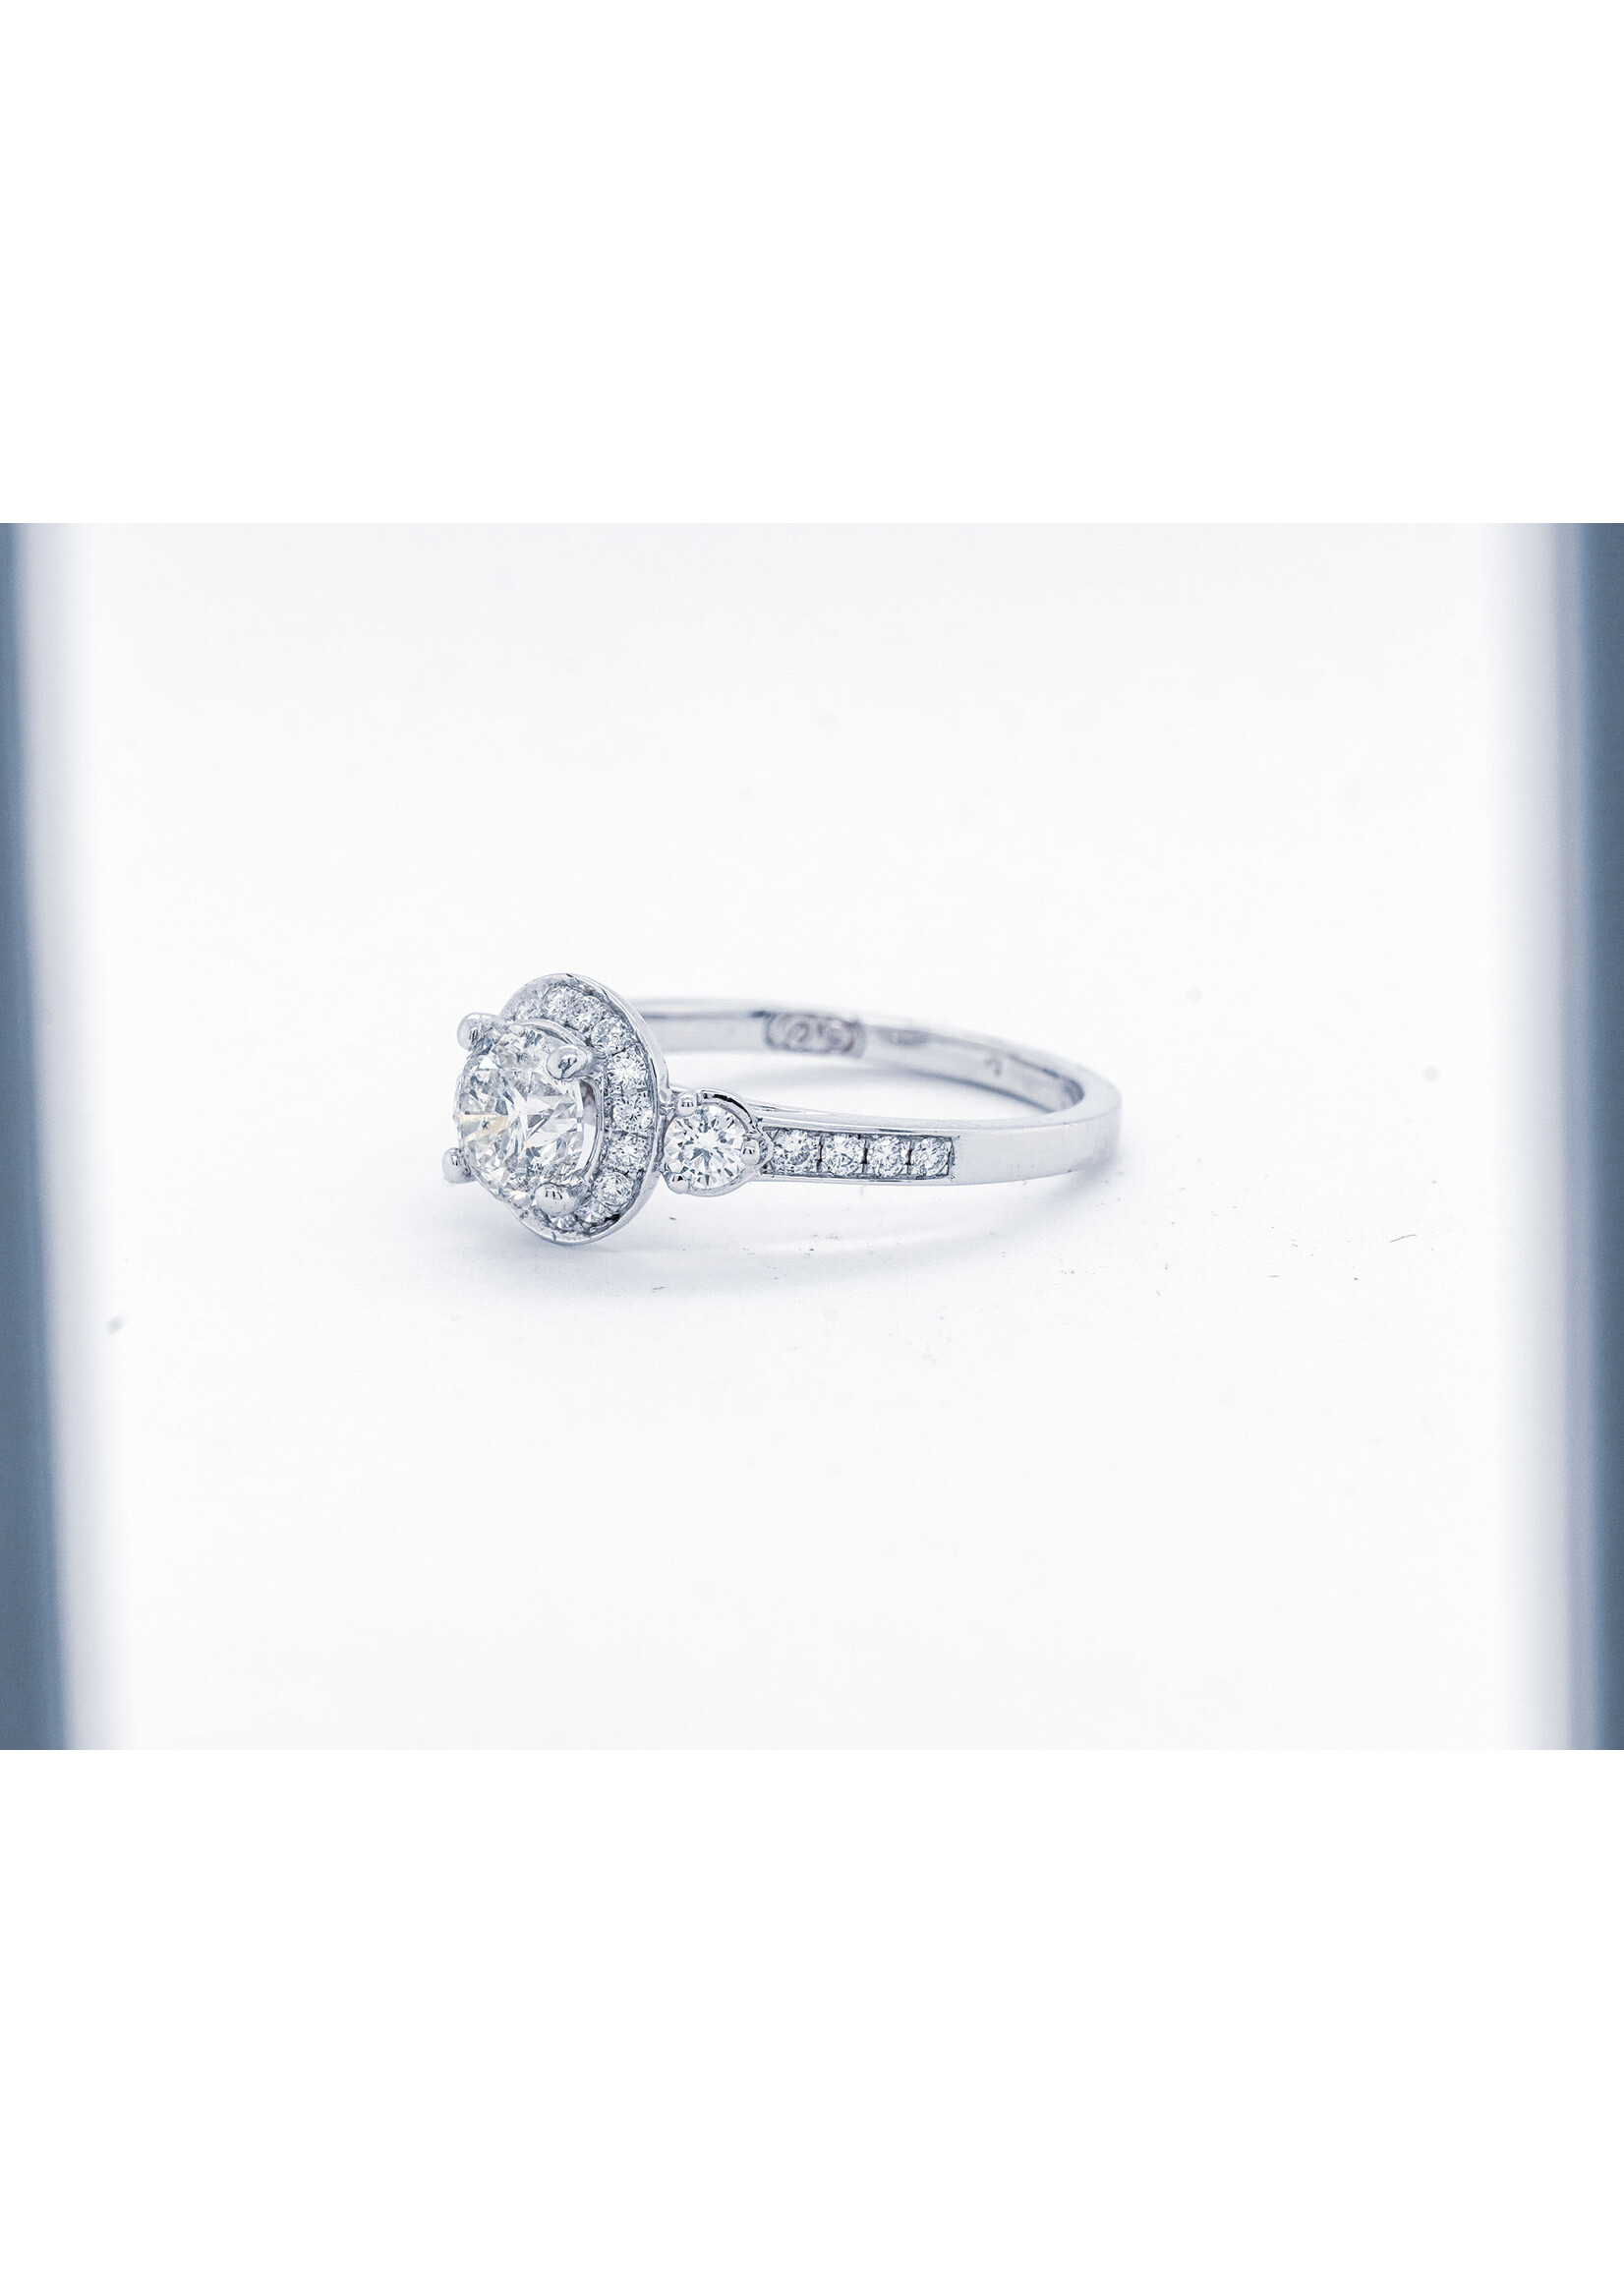 18KW 3.33g 1.31TW (.91ctr) H/SI1 Round Diamond Demarco Halo Engagement Ring (size 6.5)